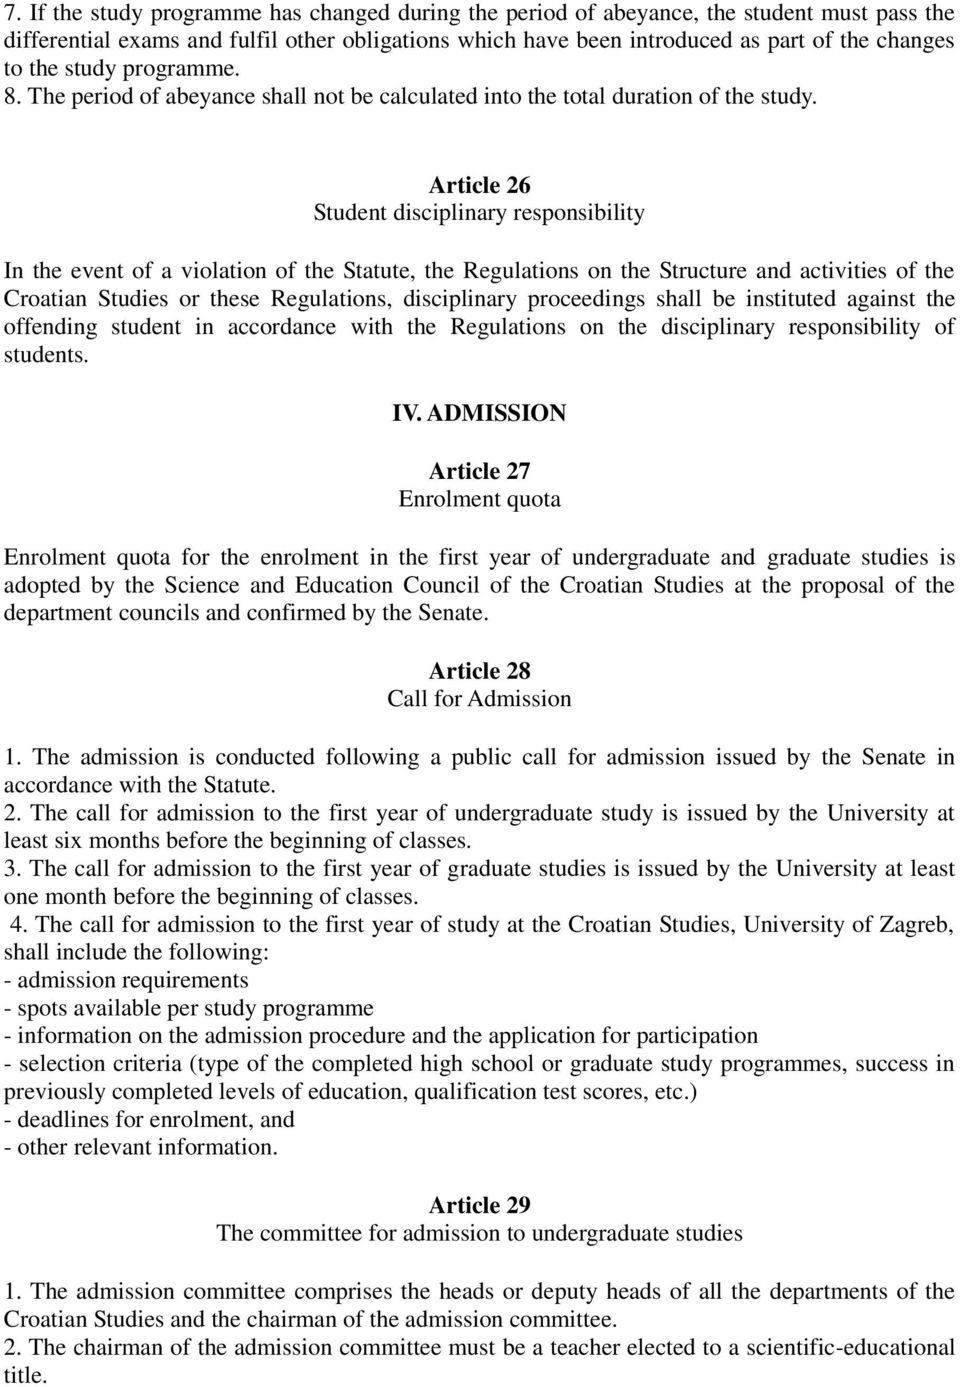 Article 26 Student disciplinary responsibility In the event of a violation of the Statute, the Regulations on the Structure and activities of the Croatian Studies or these Regulations, disciplinary